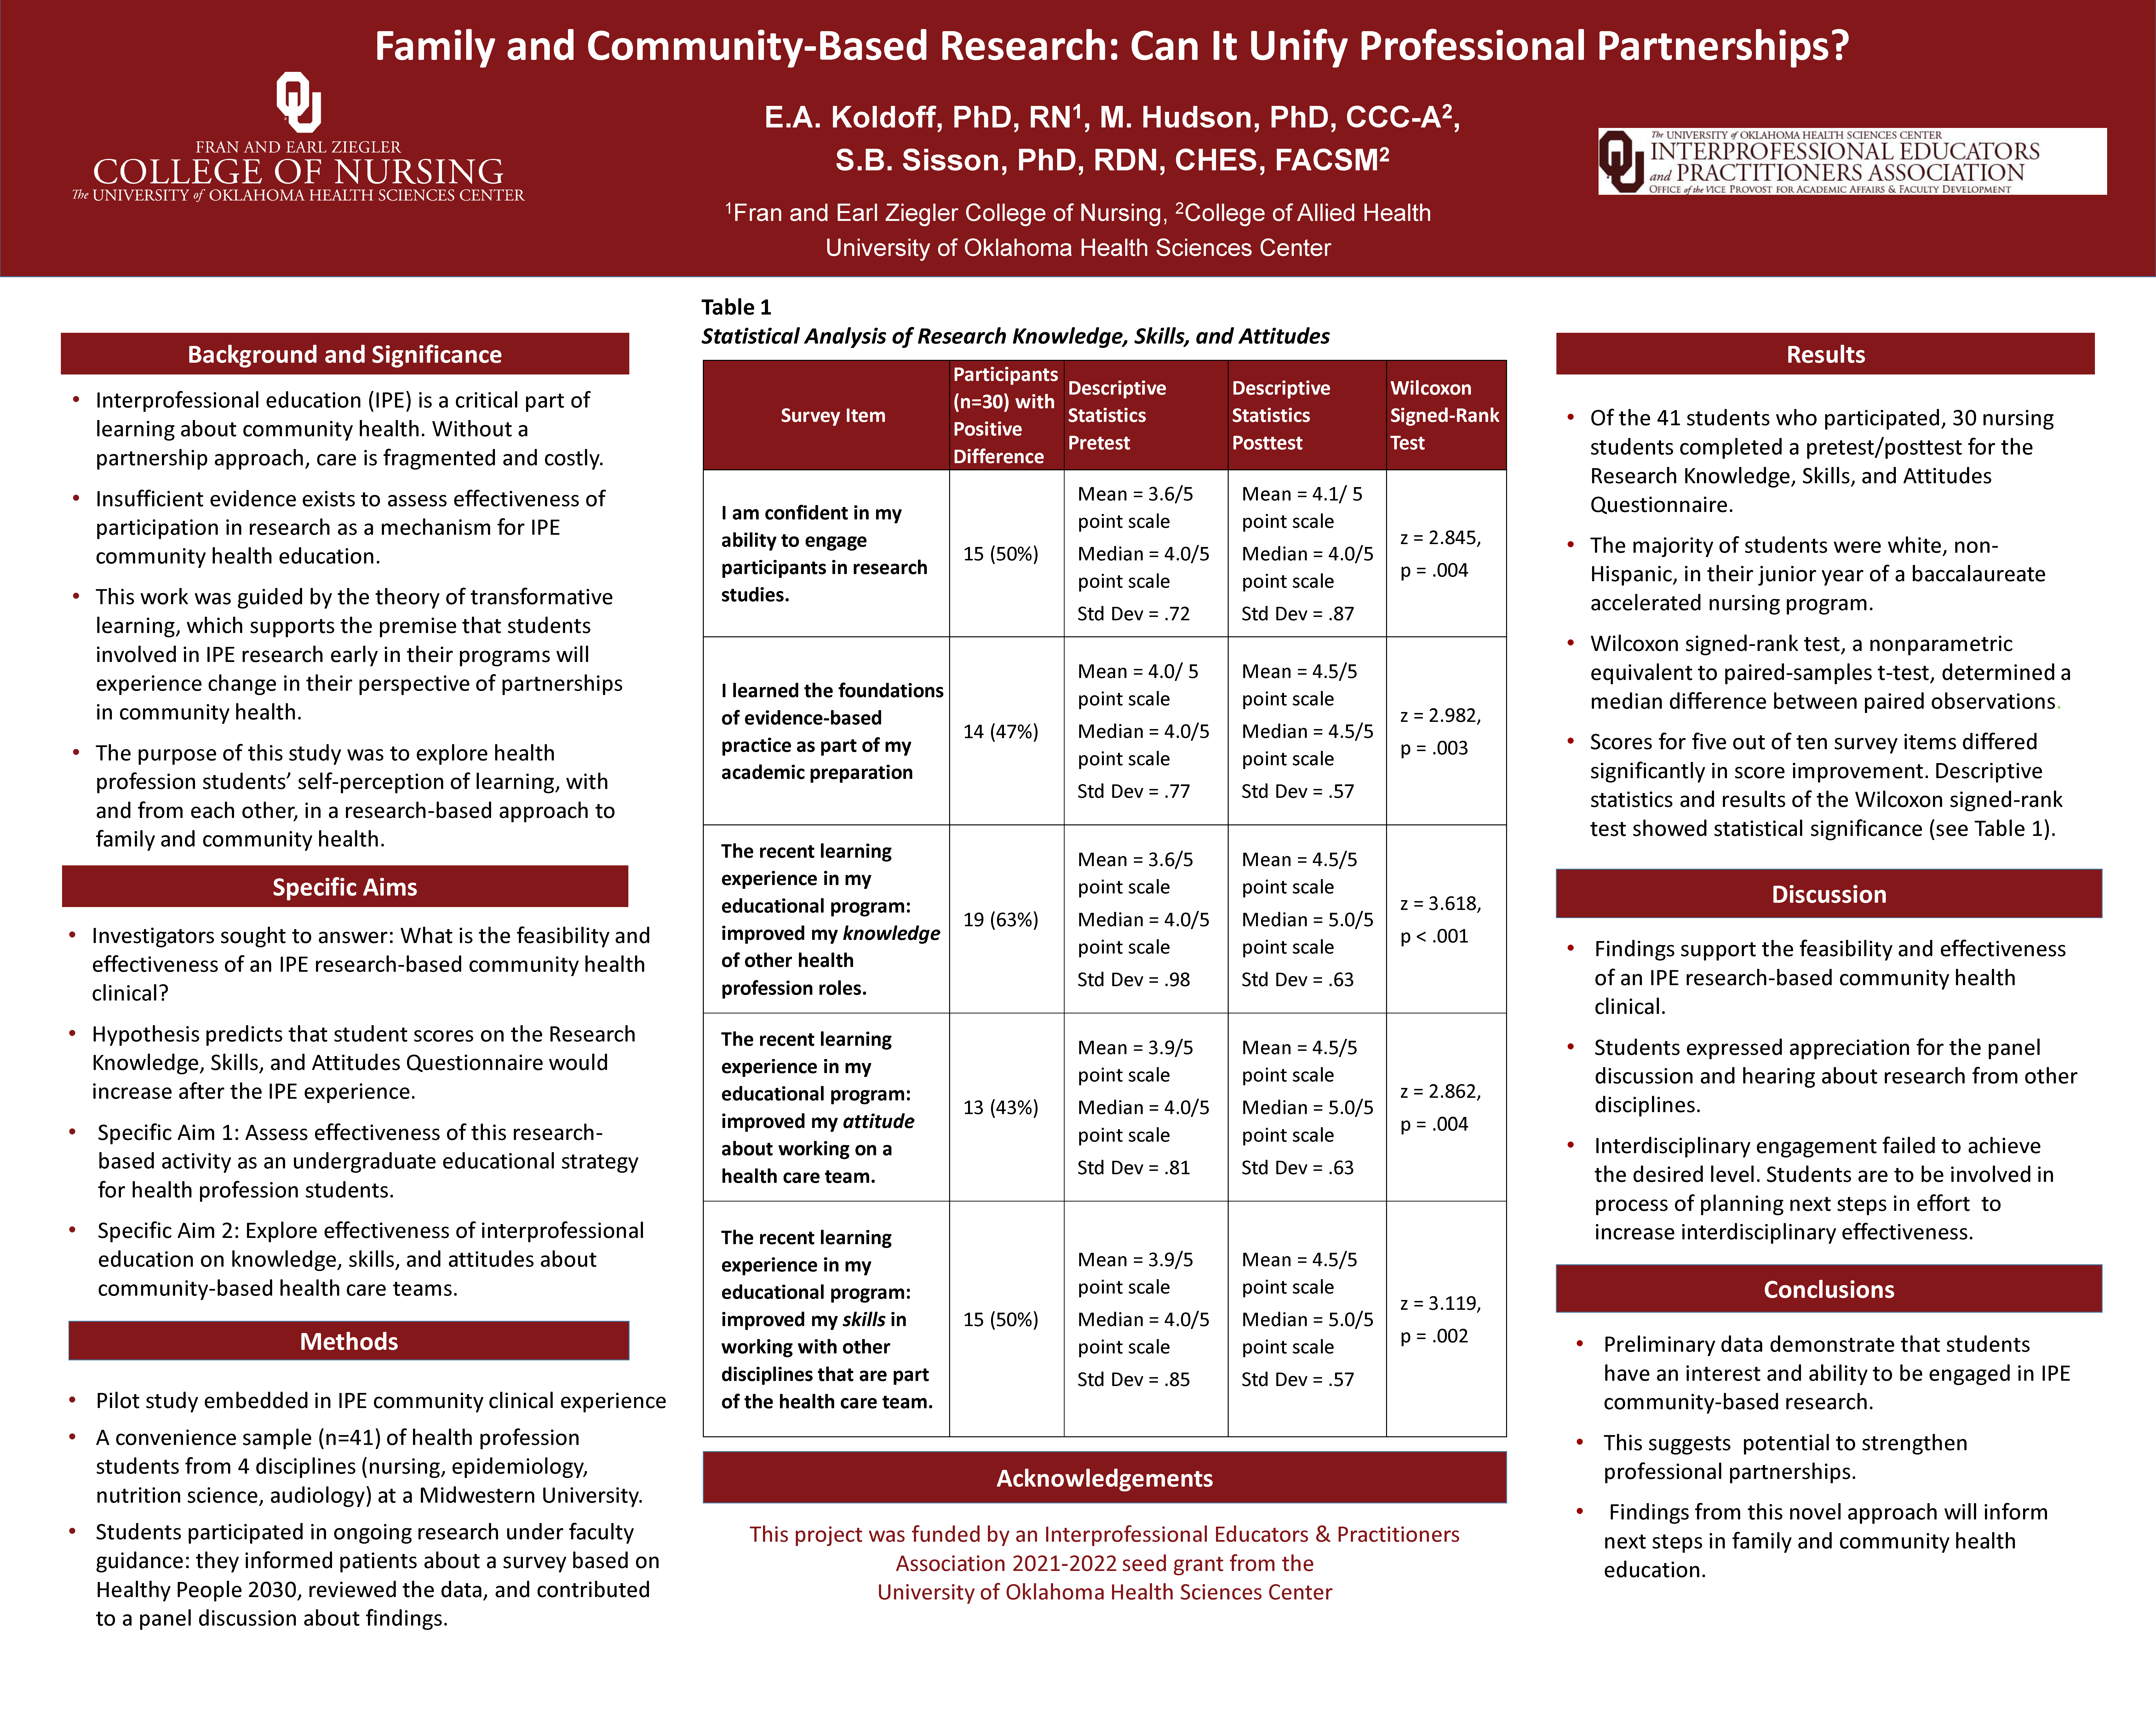 Family and Community Based Research Can It Unify Professional Partnerships